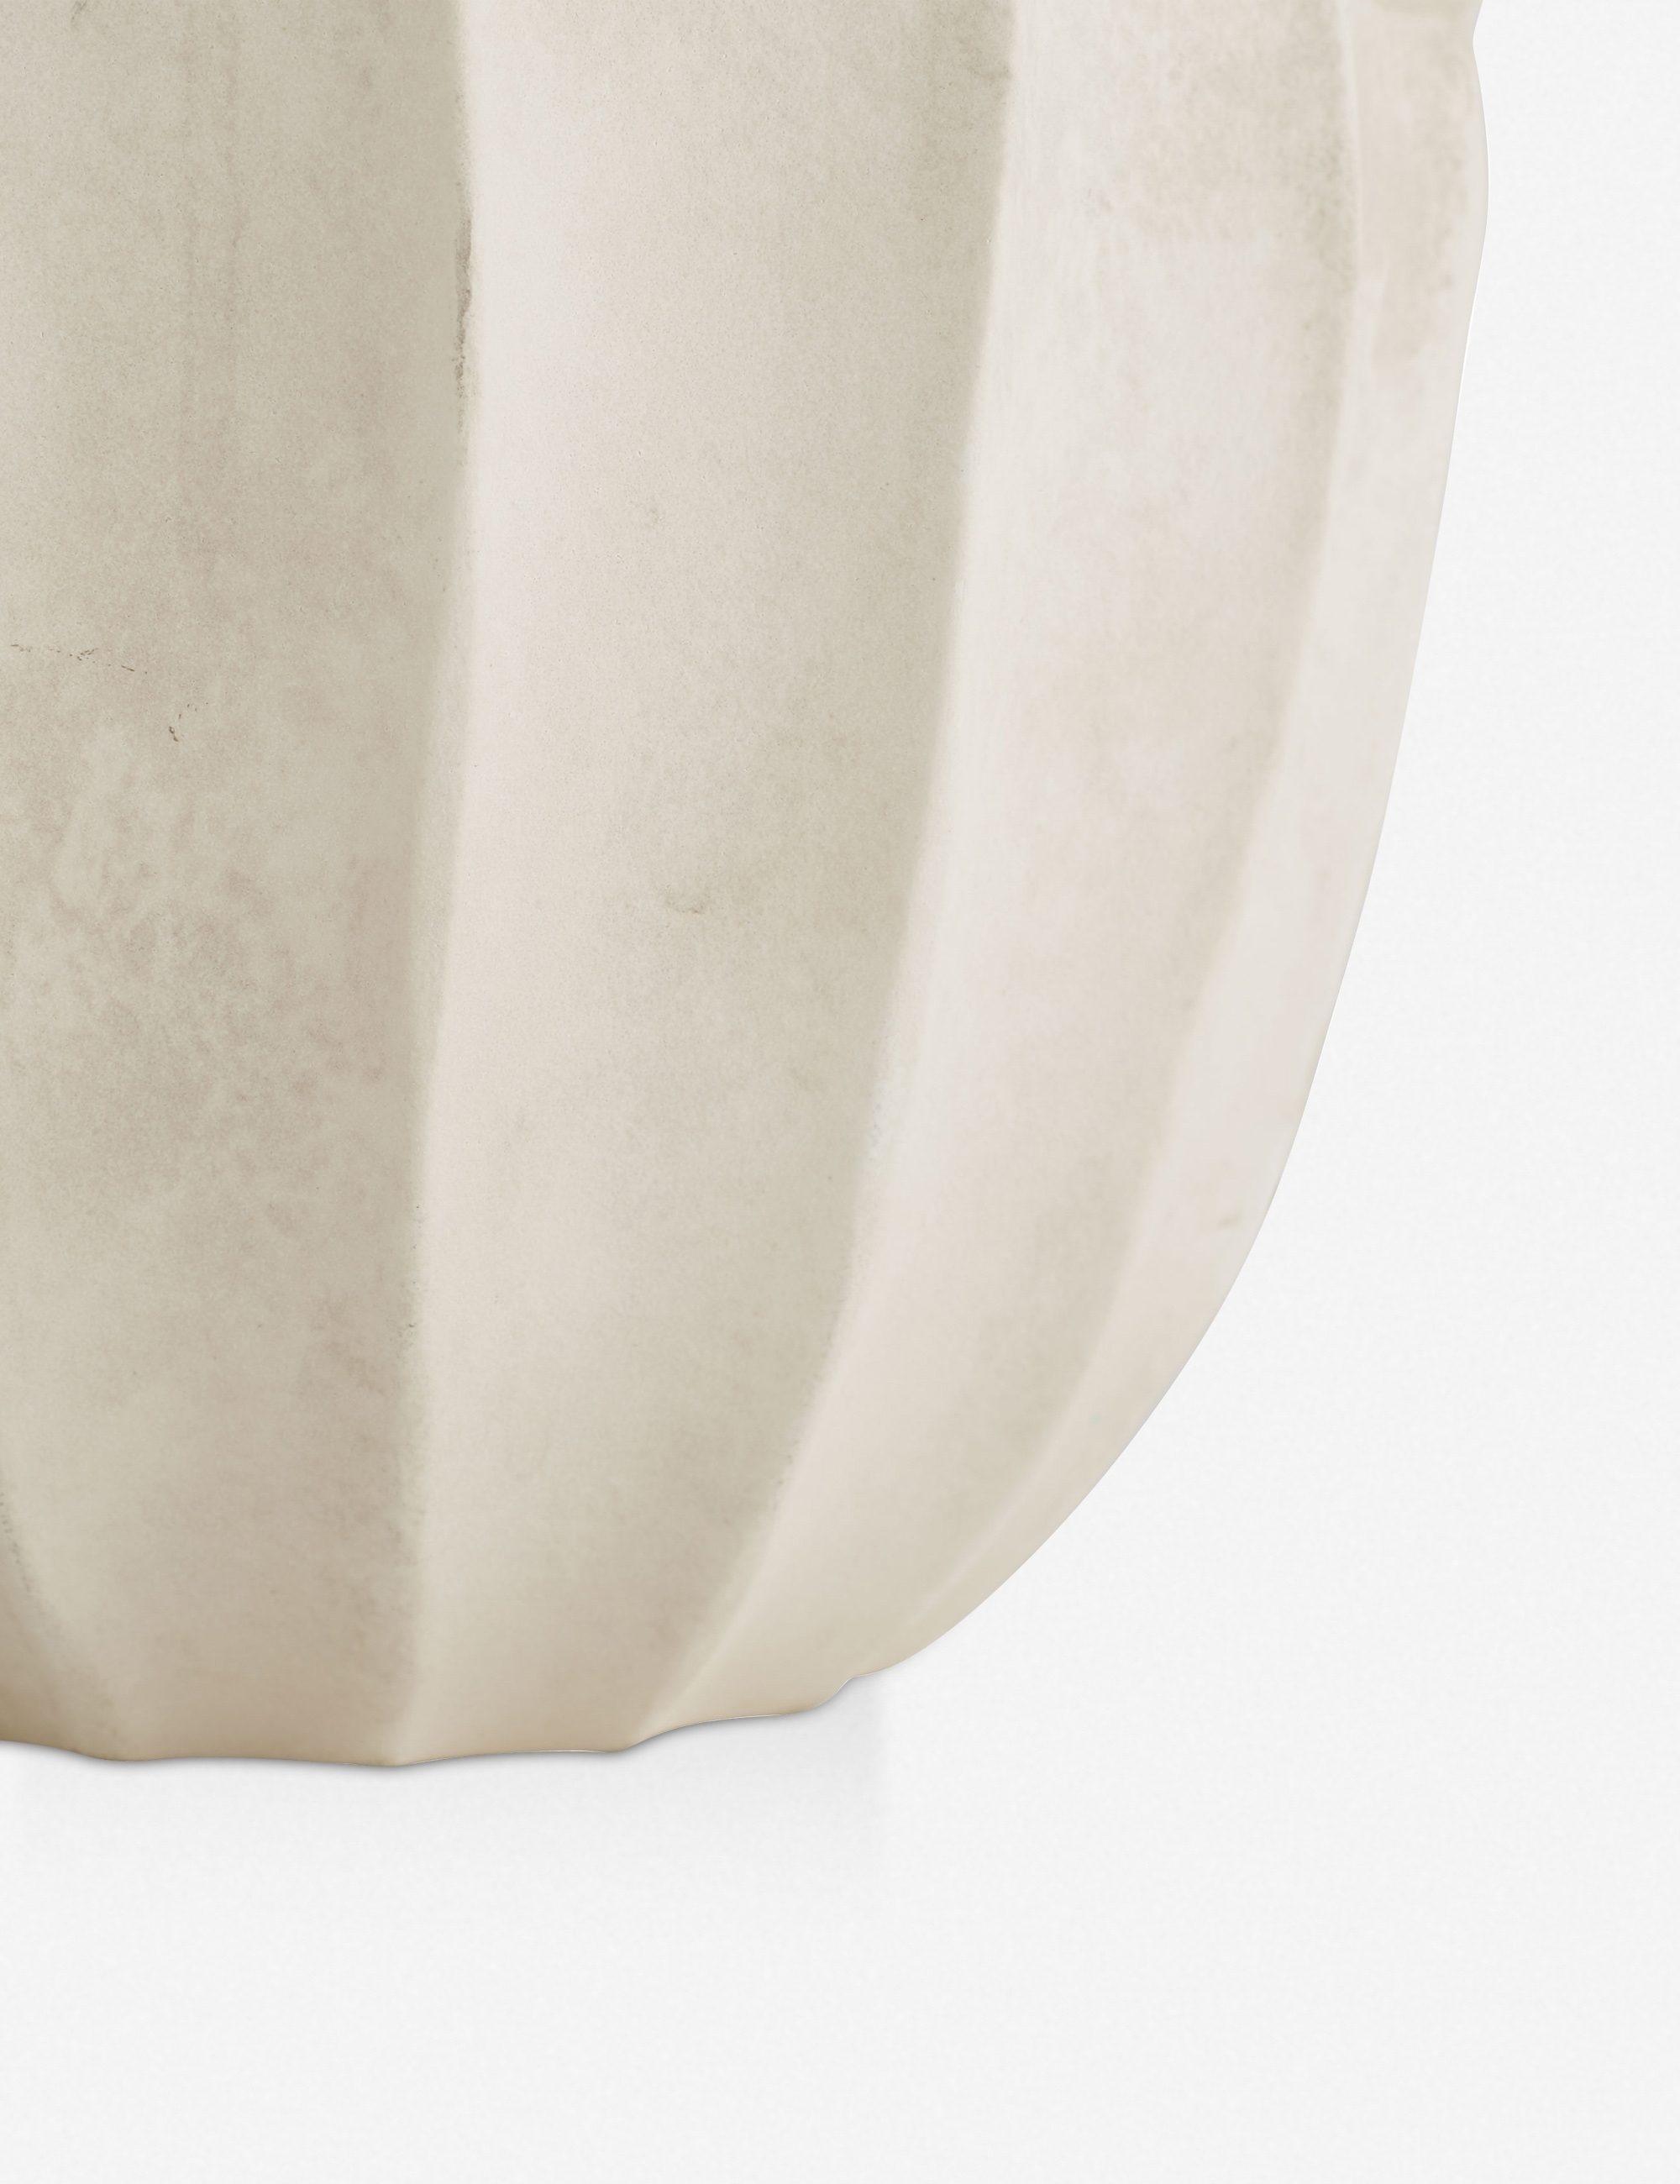 Tangier Table Lamp by Beth Webb for Arteriors - Image 3